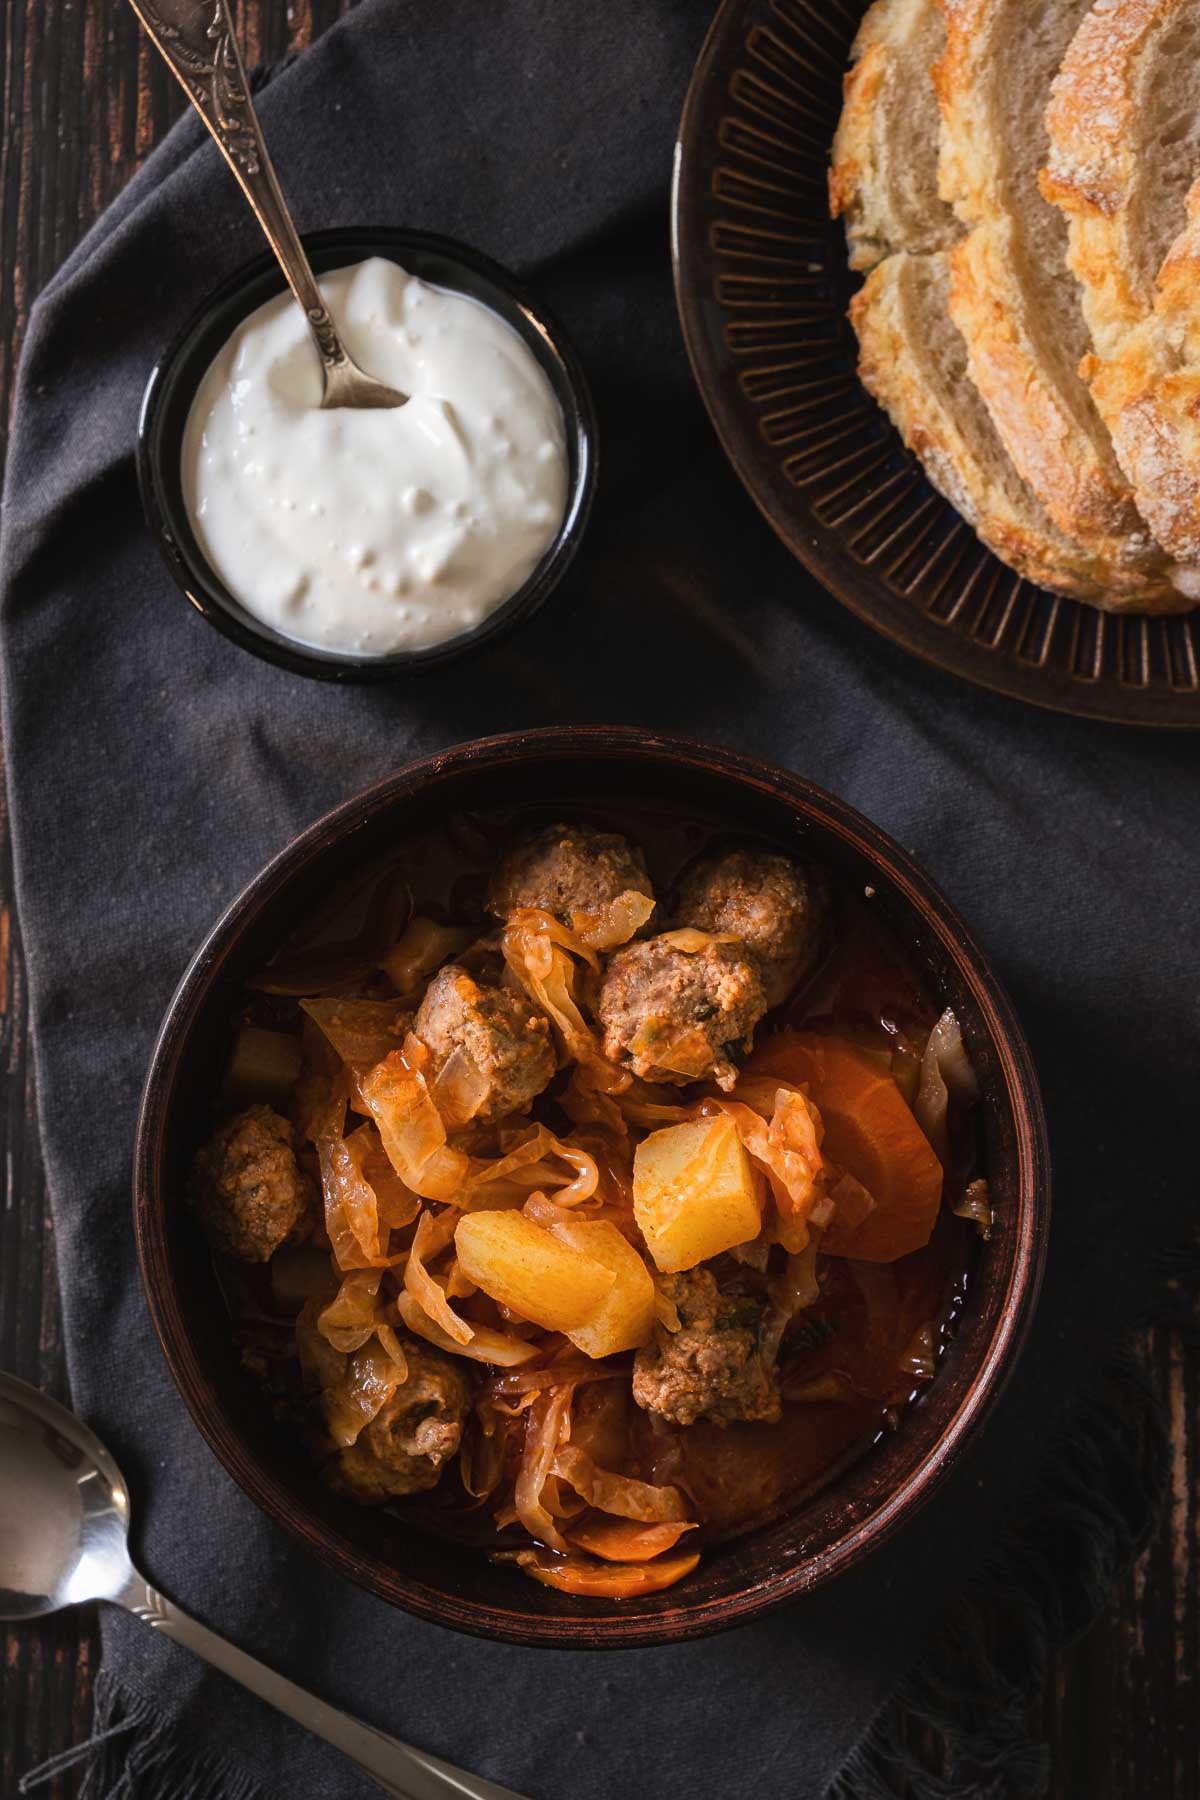 A brown bowl full of thick stew with meatballs, sauerkraut, and vegetables. Sour cream is served on the side in a separate bowl next to a basket of sourdough bread..